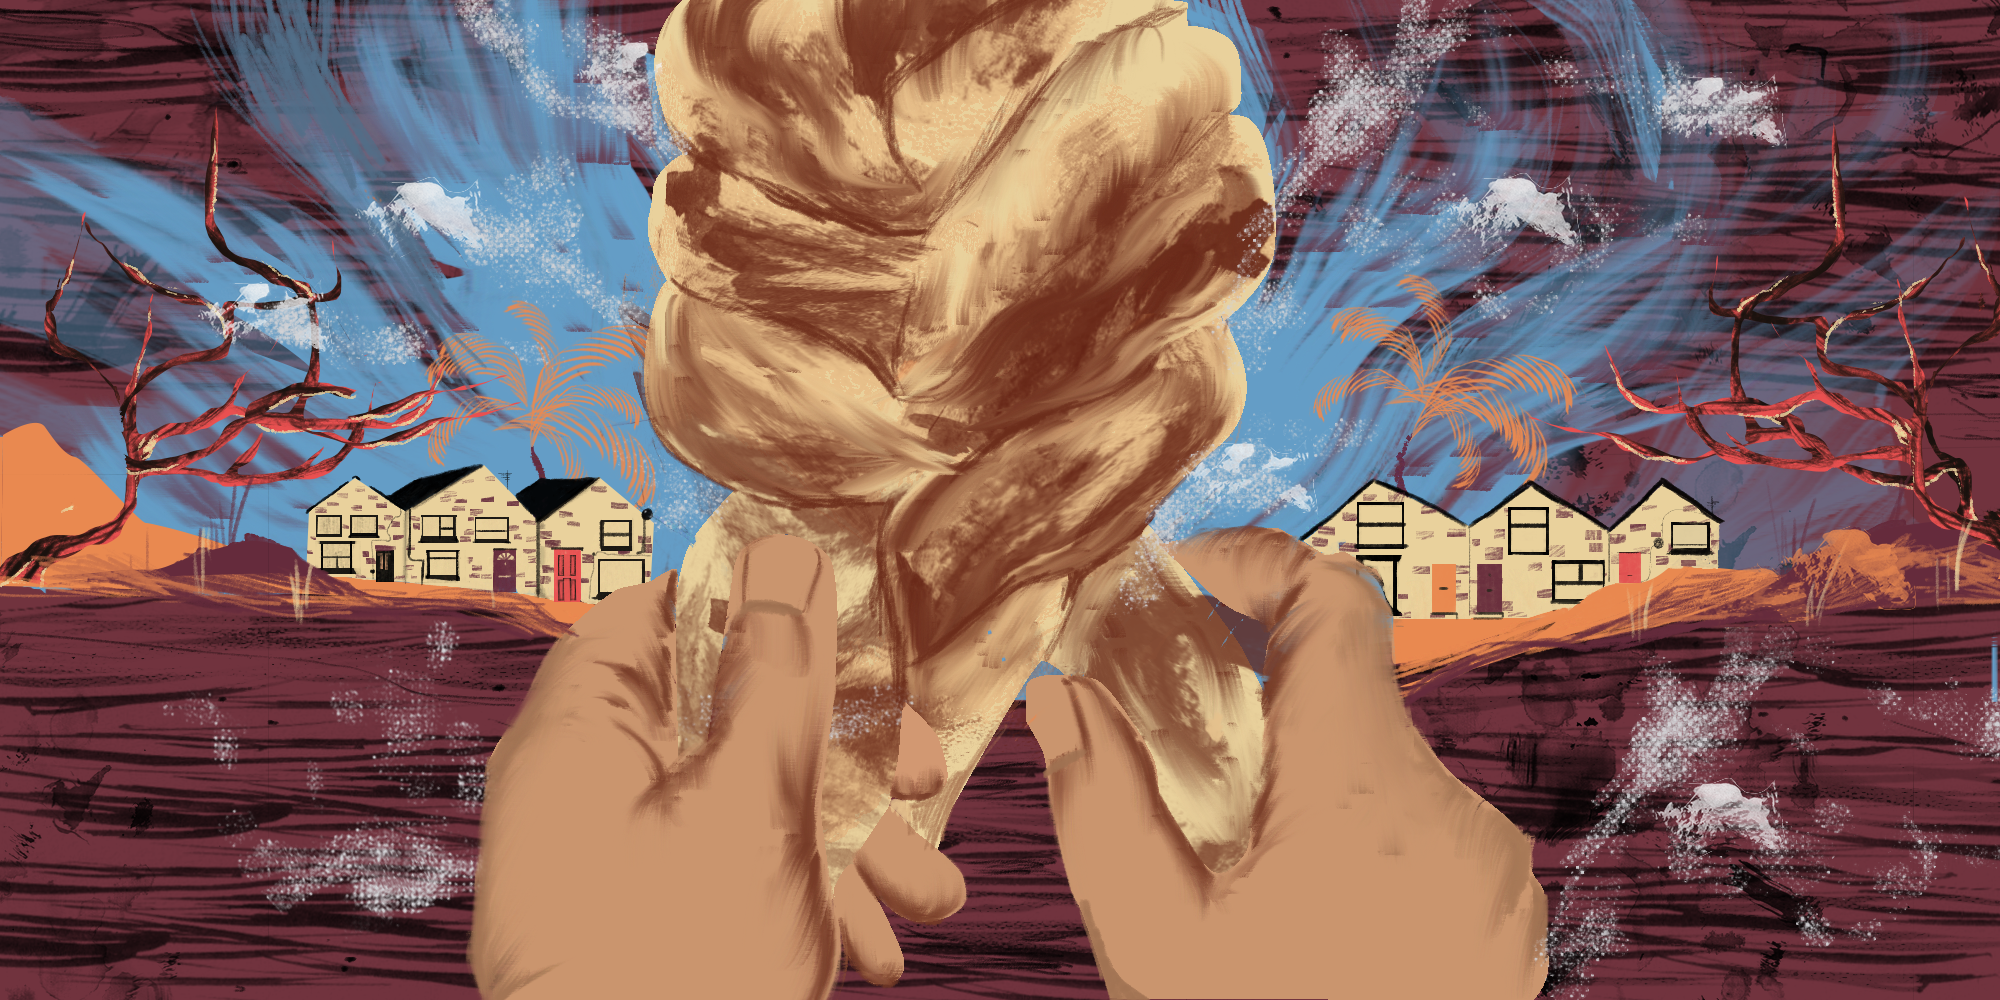 Illustration of hands braiding challah dough on a table with flour stains; in the background scenes of memories and home are depicted.